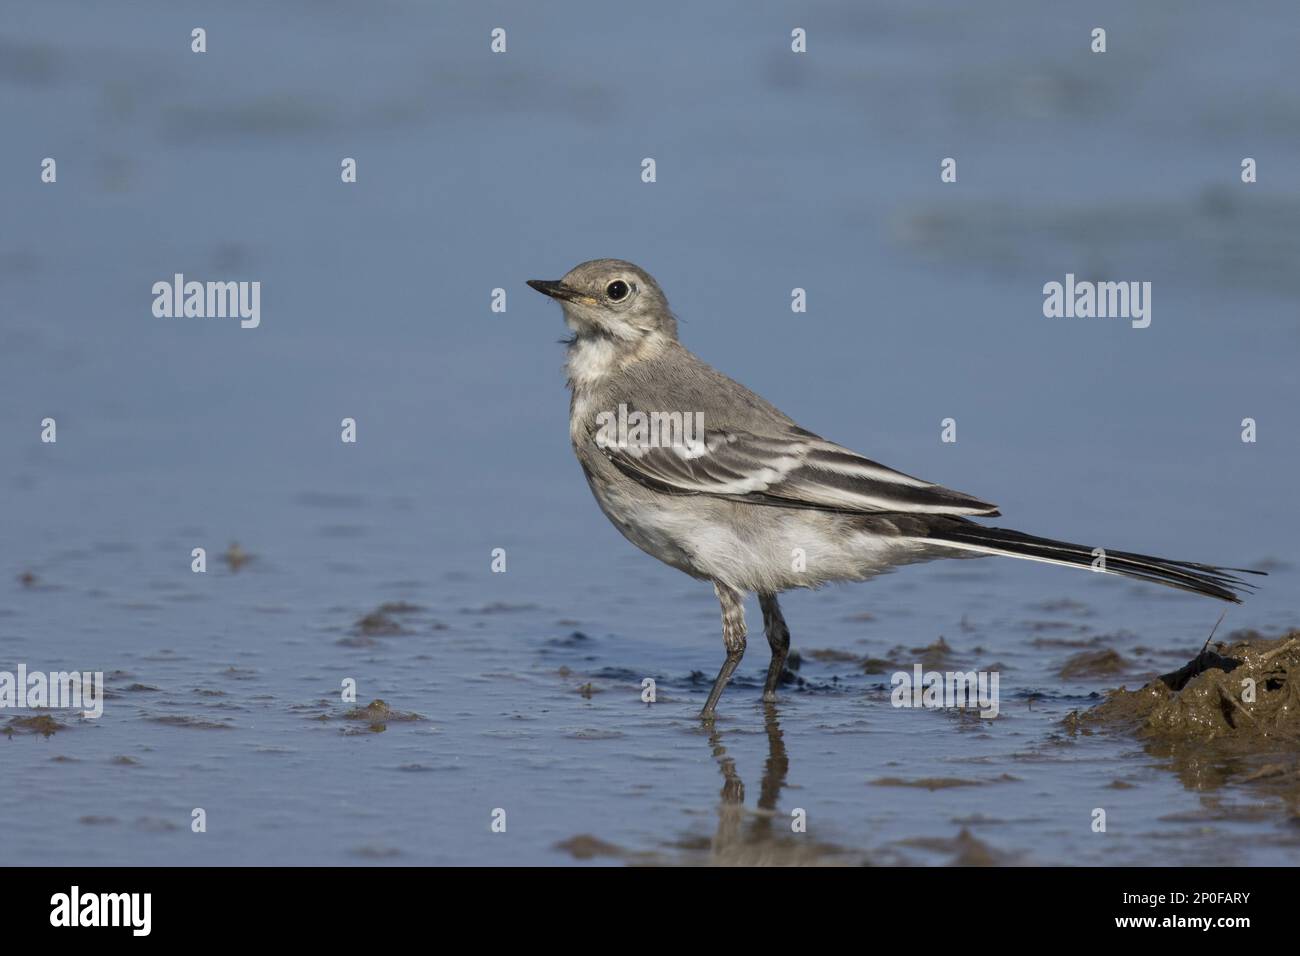 Pied Wagtail, pied Wagtail, songbirds, animali, uccelli, Pied Wagtail giovanile, fine estate Foto Stock